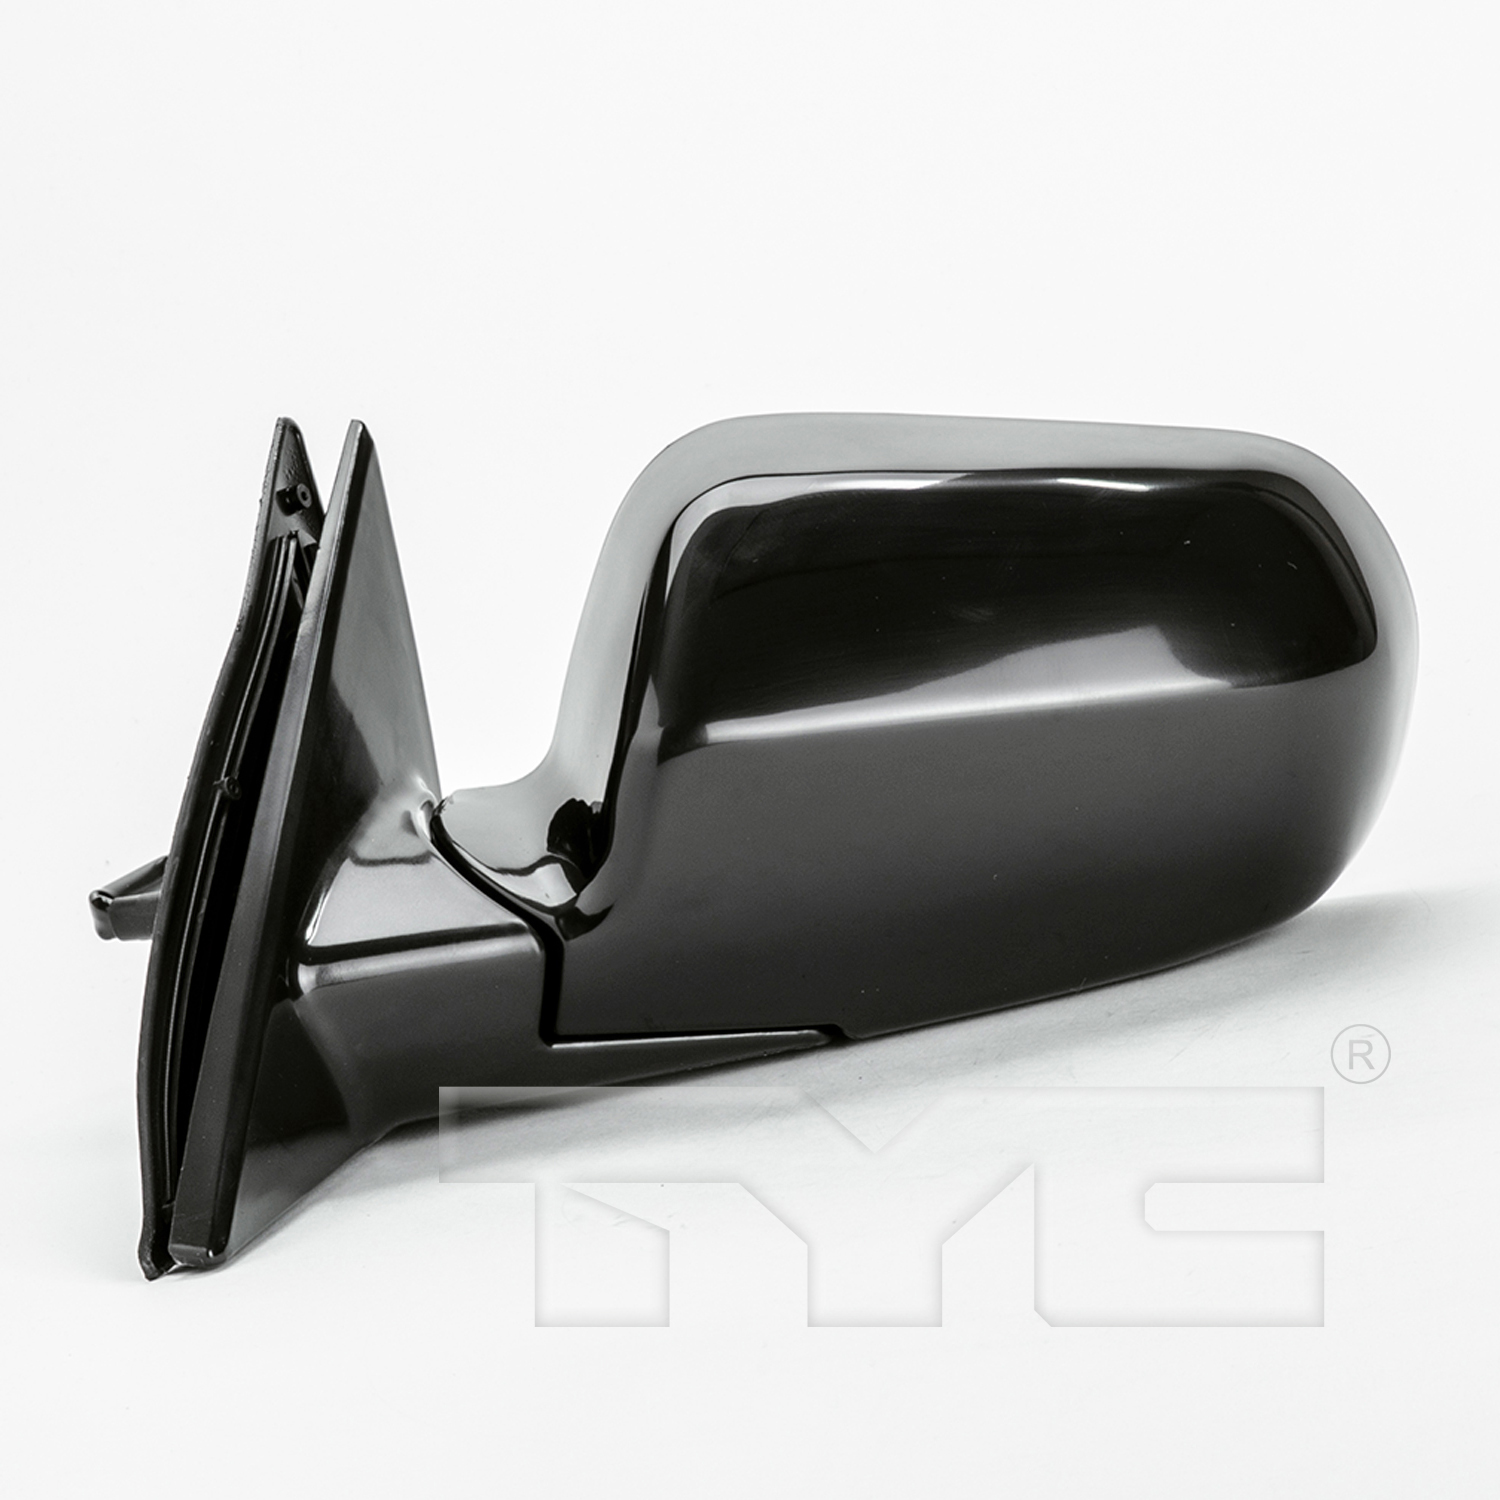 Aftermarket MIRRORS for HONDA - ACCORD, ACCORD,99-02,LT Mirror outside rear view